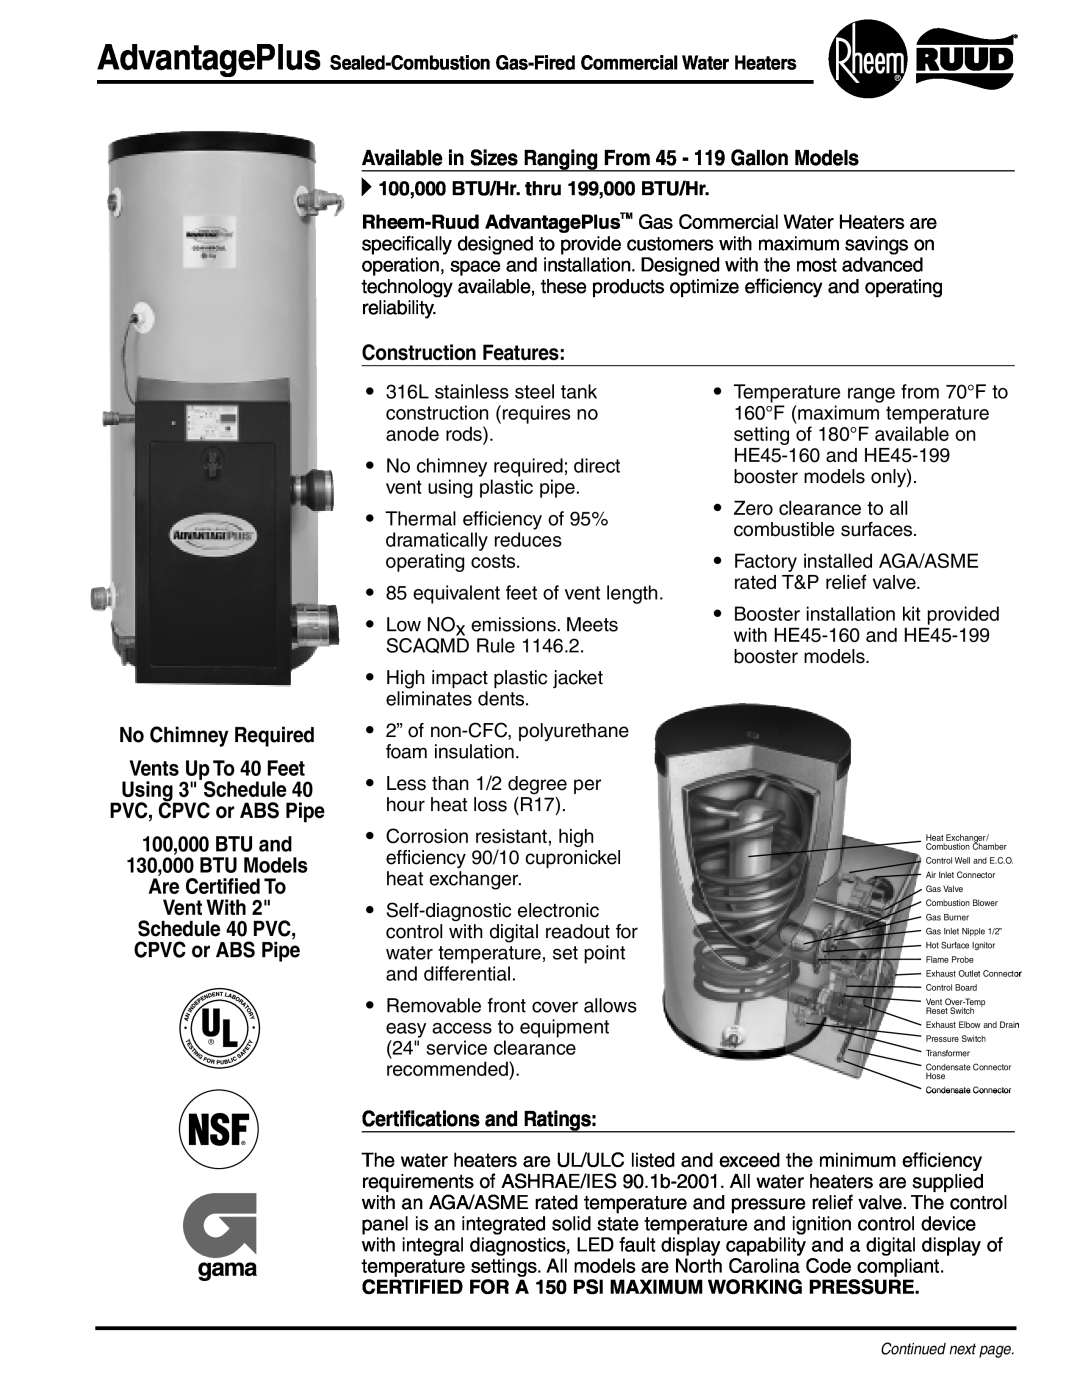 Rheem HE45-199 manual Available in Sizes Ranging From 45 - 119 Gallon Models, Construction Features, No Chimney Required 